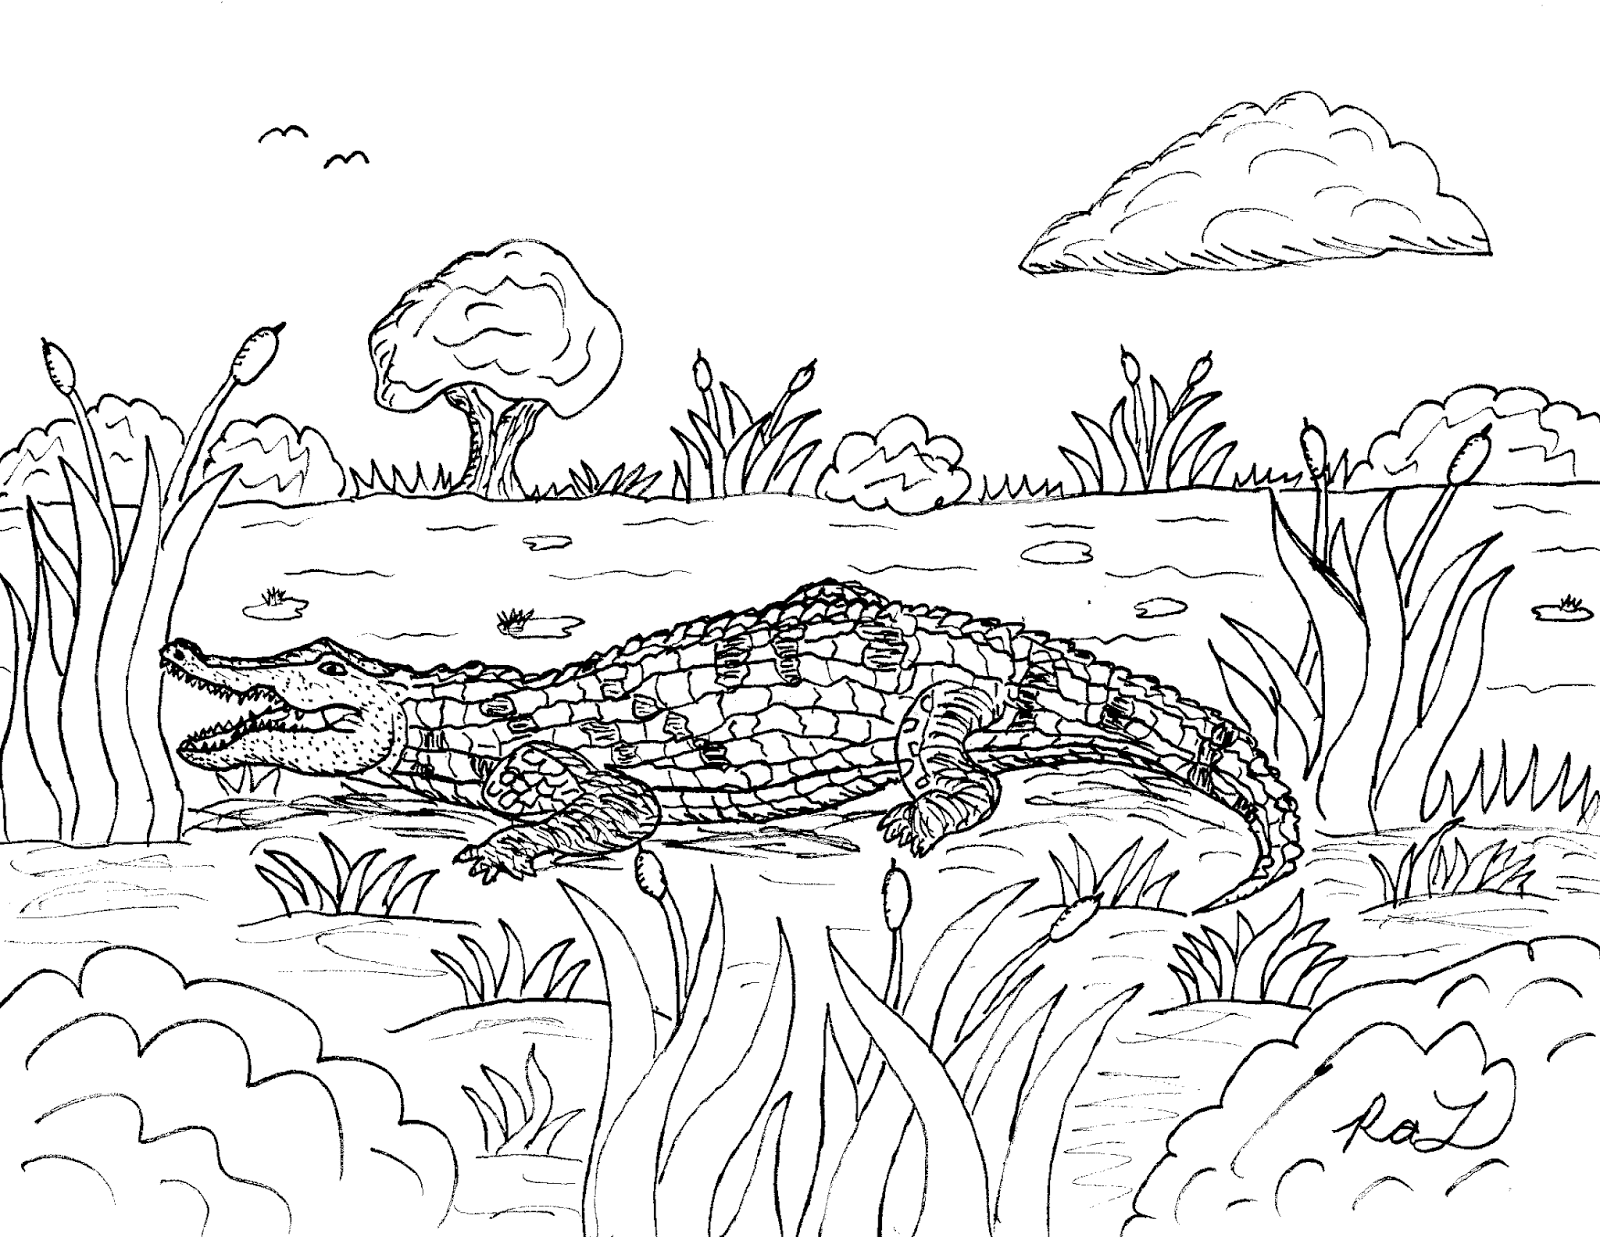 Robin's Great Coloring Pages: American Alligator and Sarcosuchus